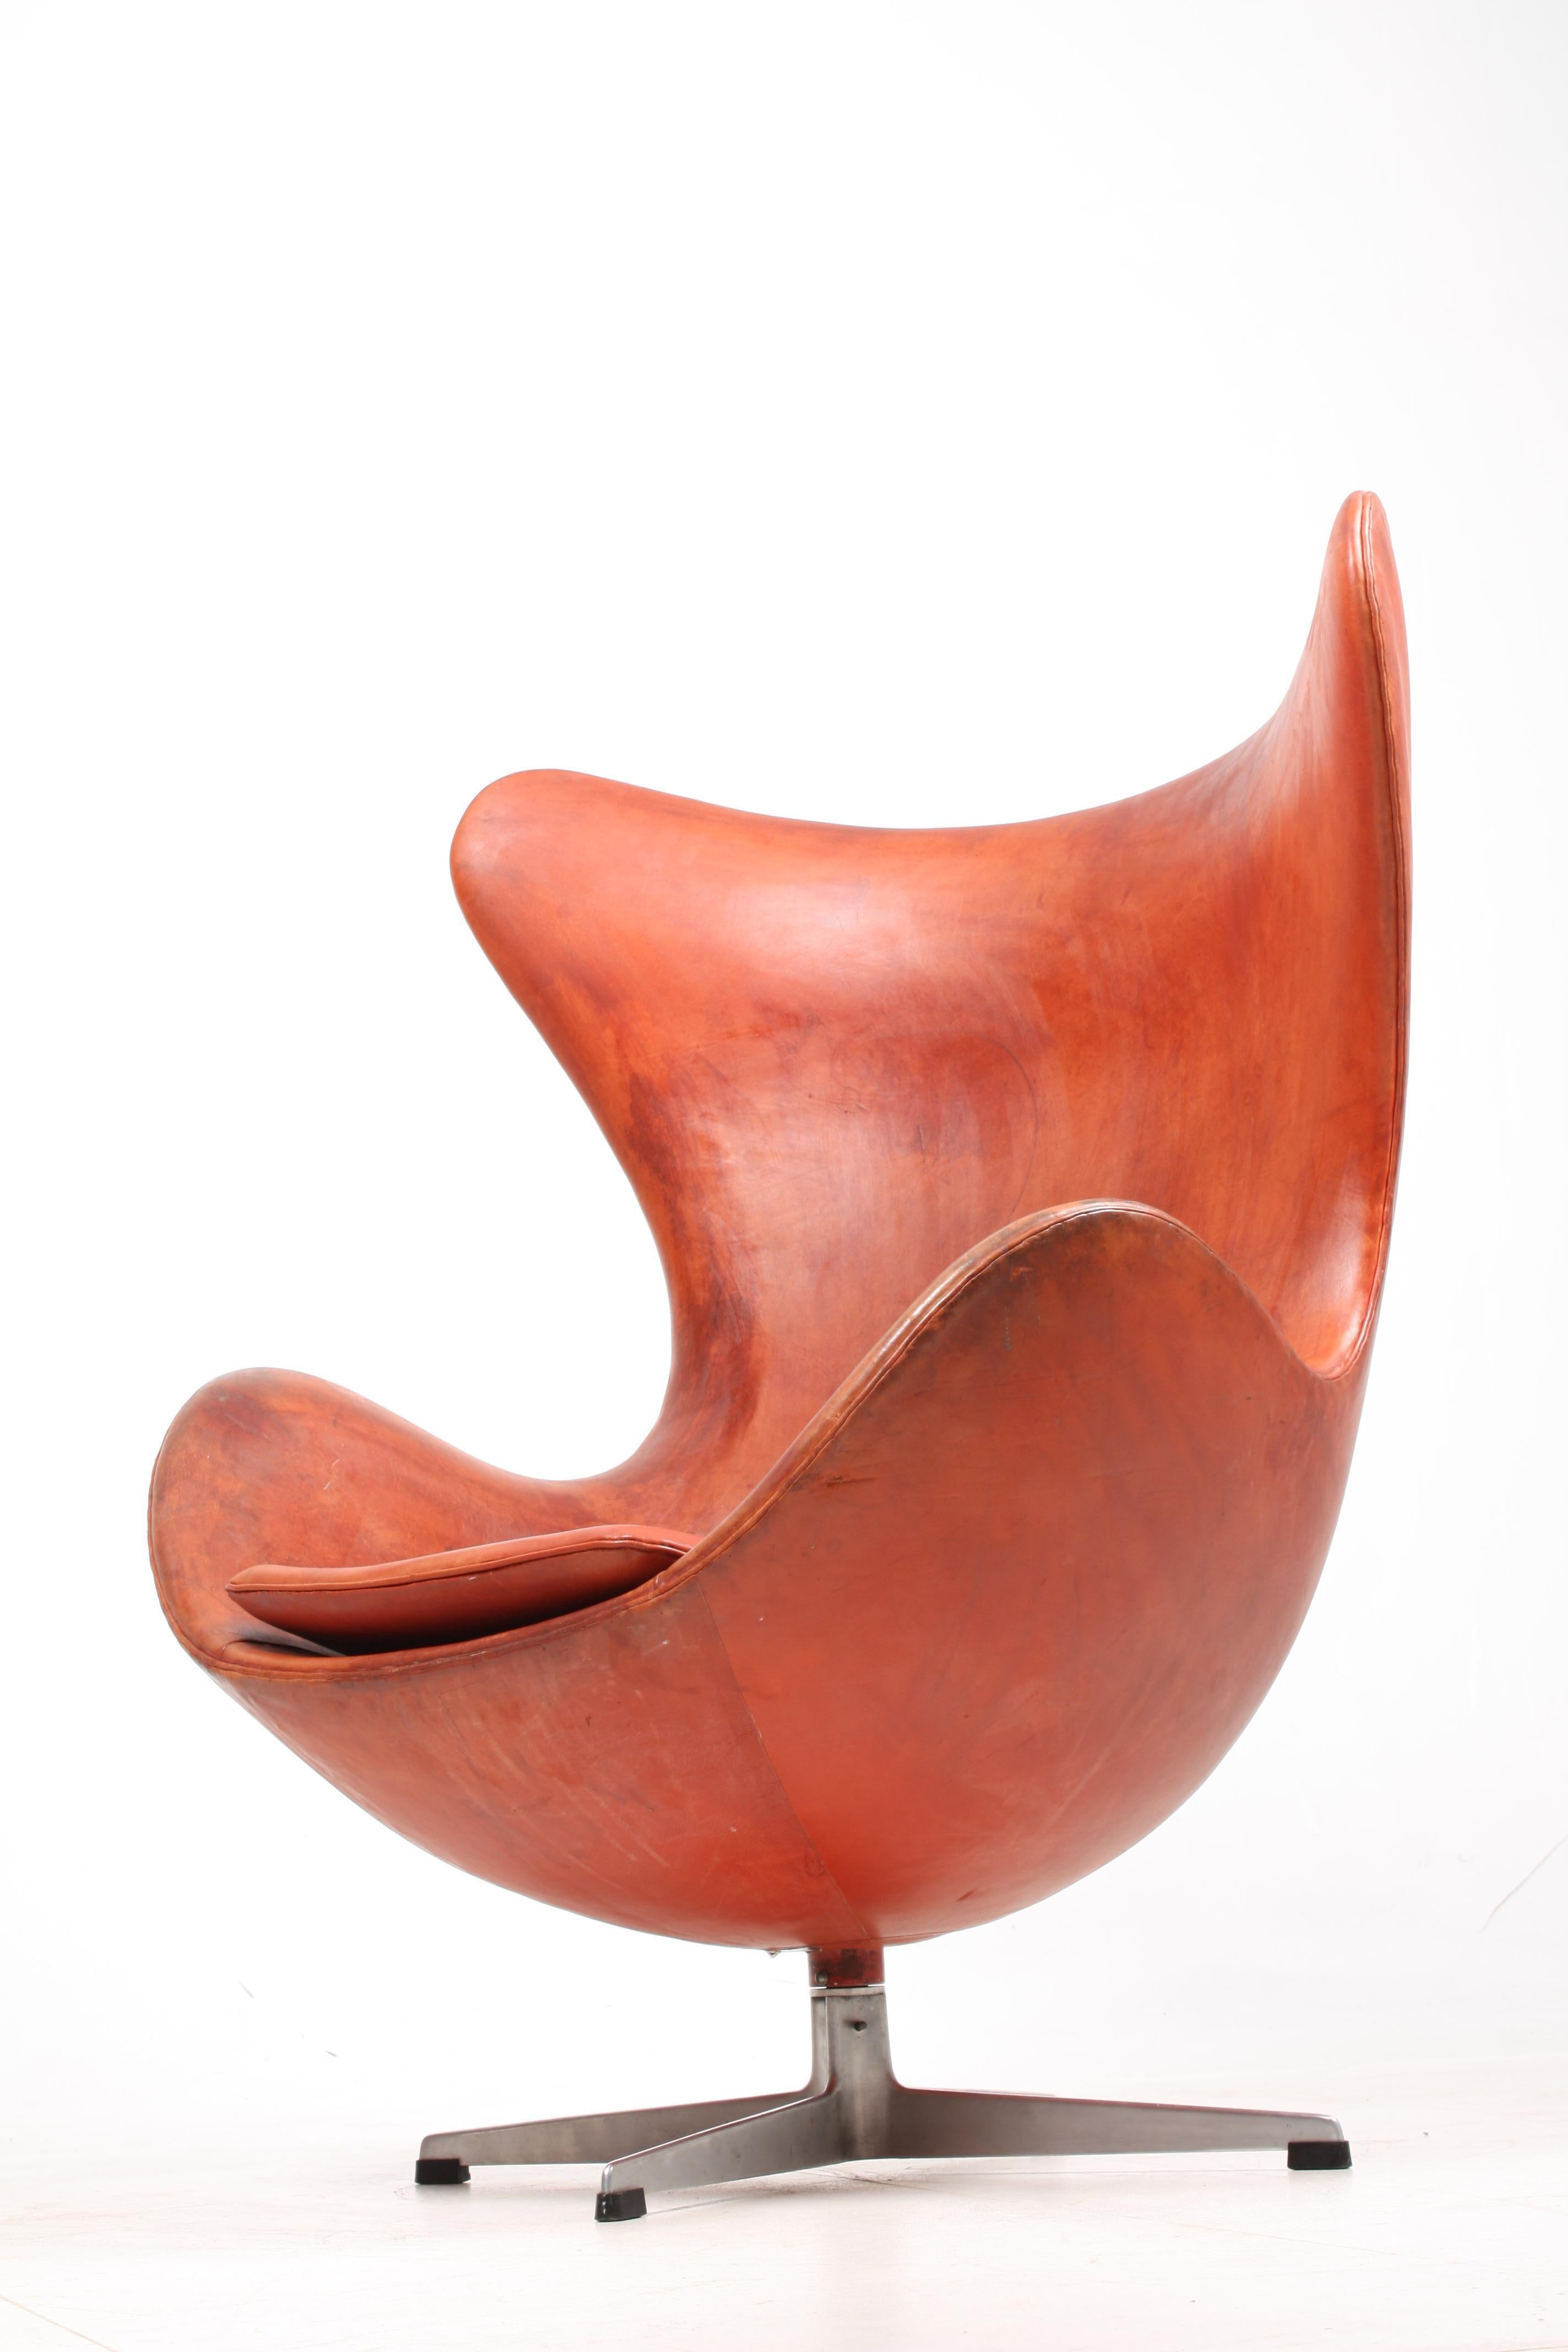 Midcentury Egg Chair in Patinated Leather by Arne Jacobsen, Danish, 1960s 1